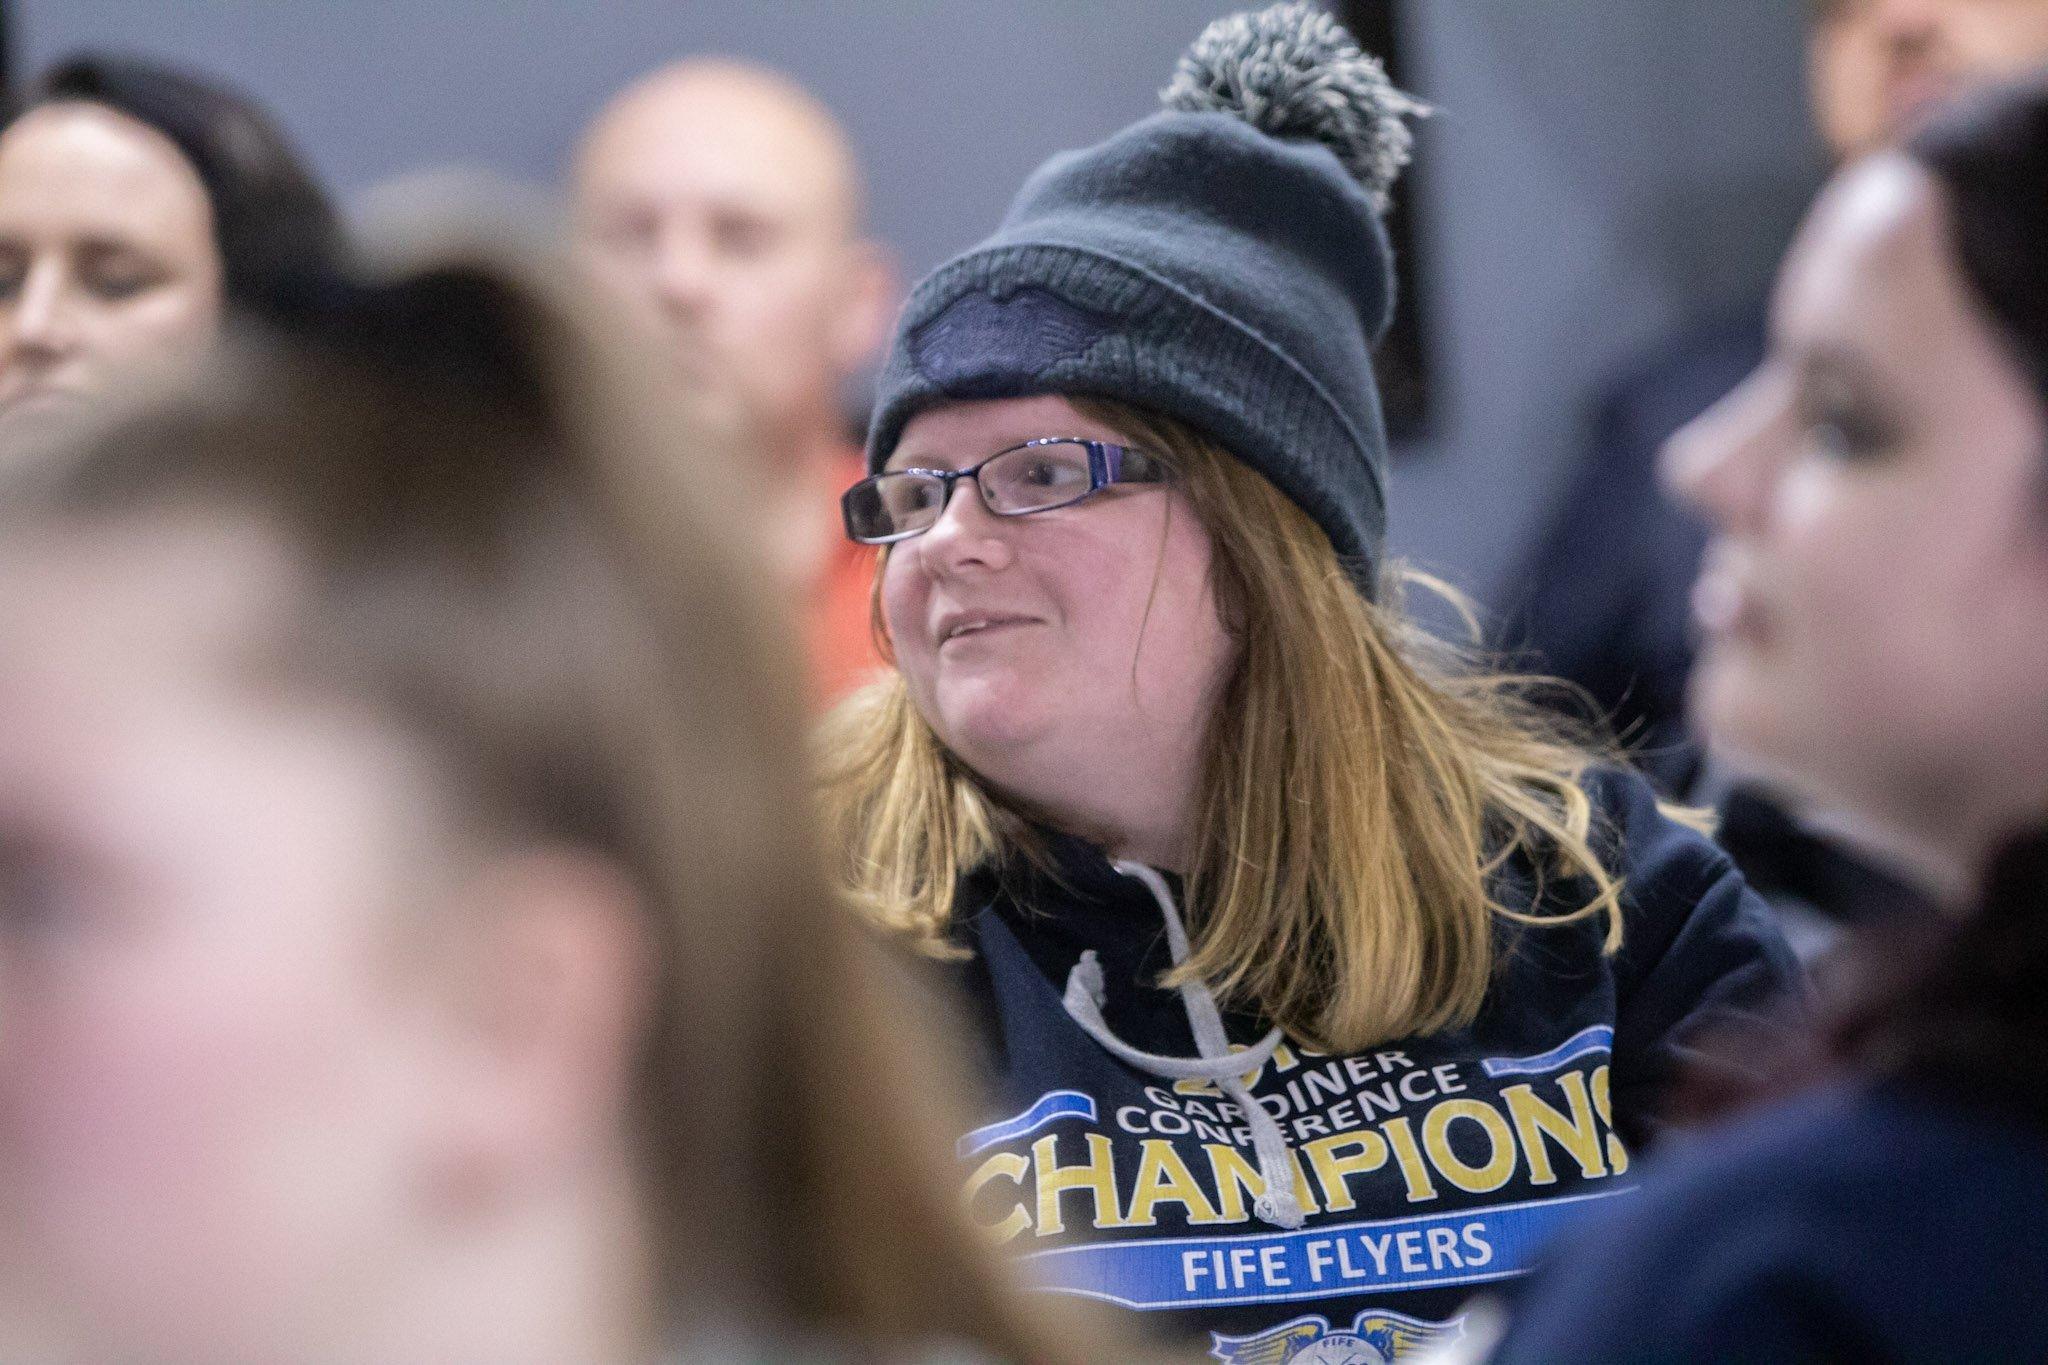 Fife Flyers Hockey Show, organised with the Fife Free Press (Pic: Derek Young)